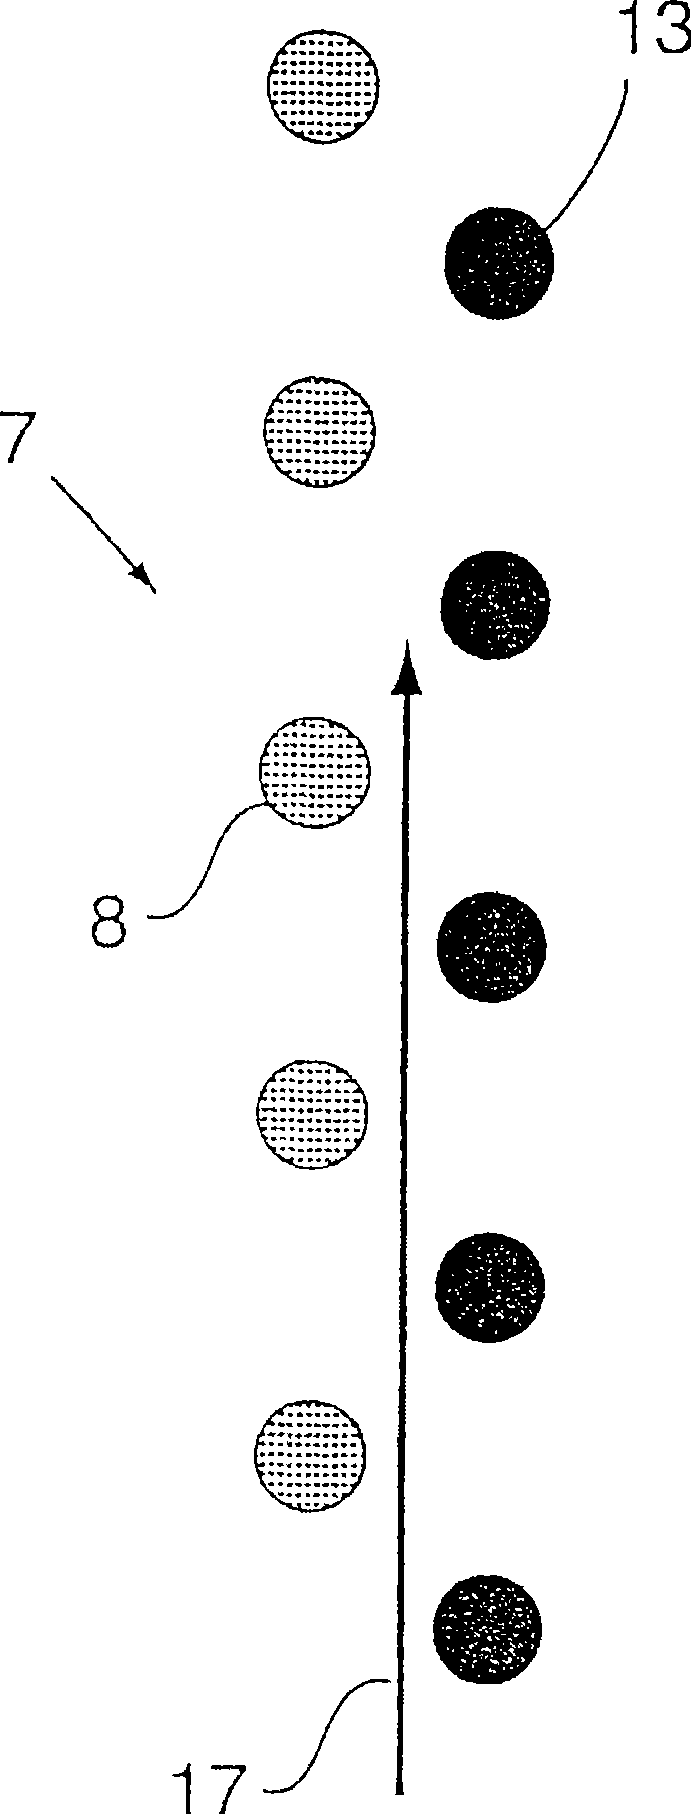 Security element with an optically variable structure